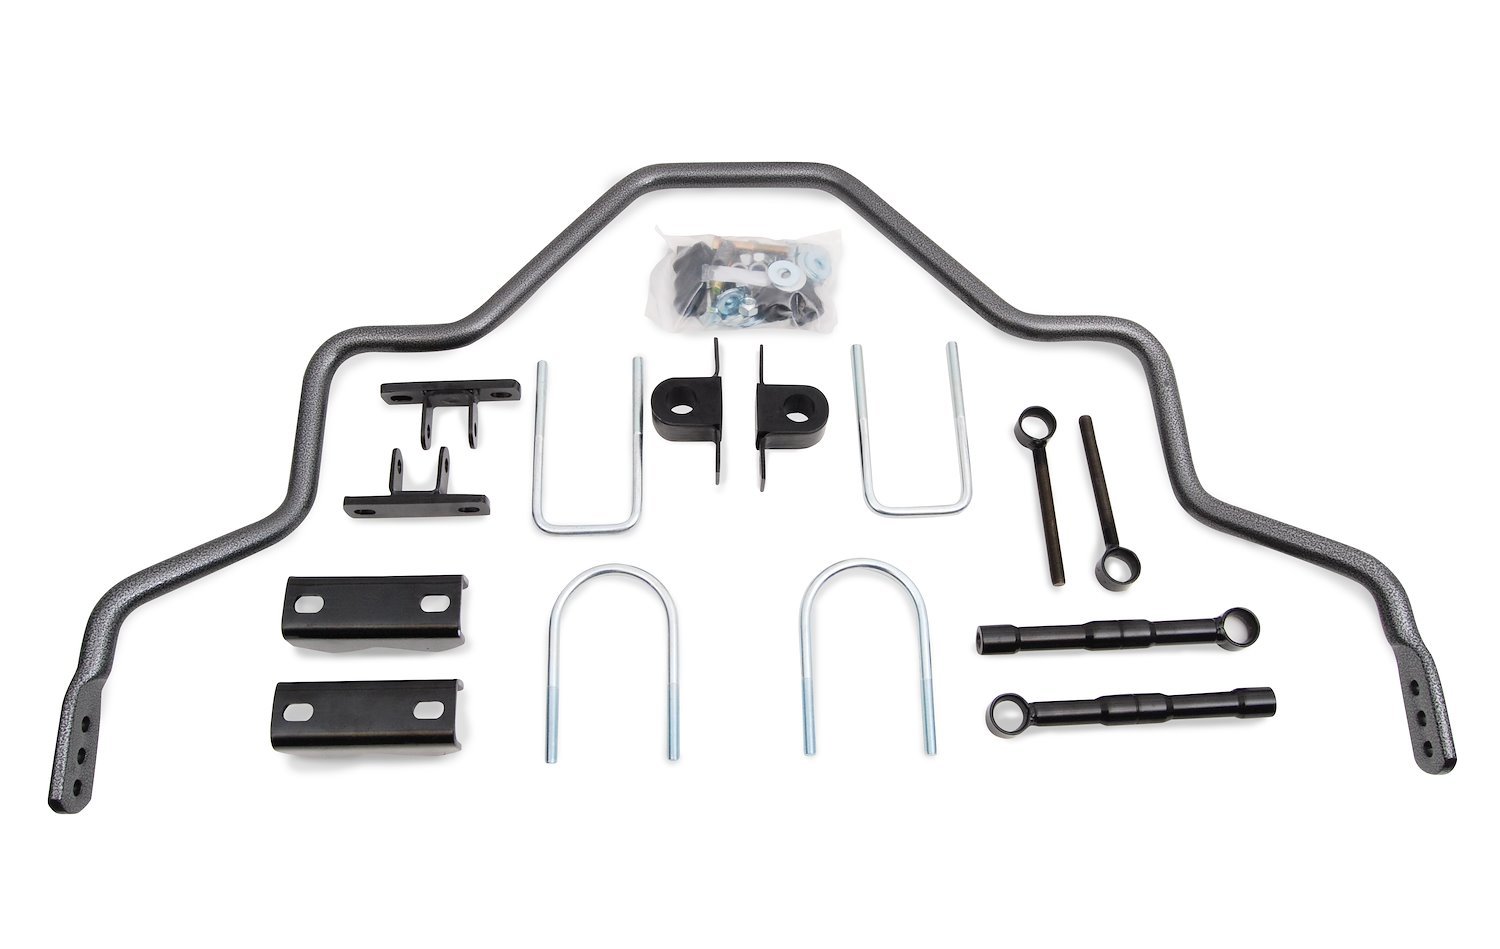 Rear Sway Bar Kit for Select Late-Model Chevy Silverado 1500, GMC Sierra 1500 Pickup Trucks 2WD/4WD [Stock Ride Height]